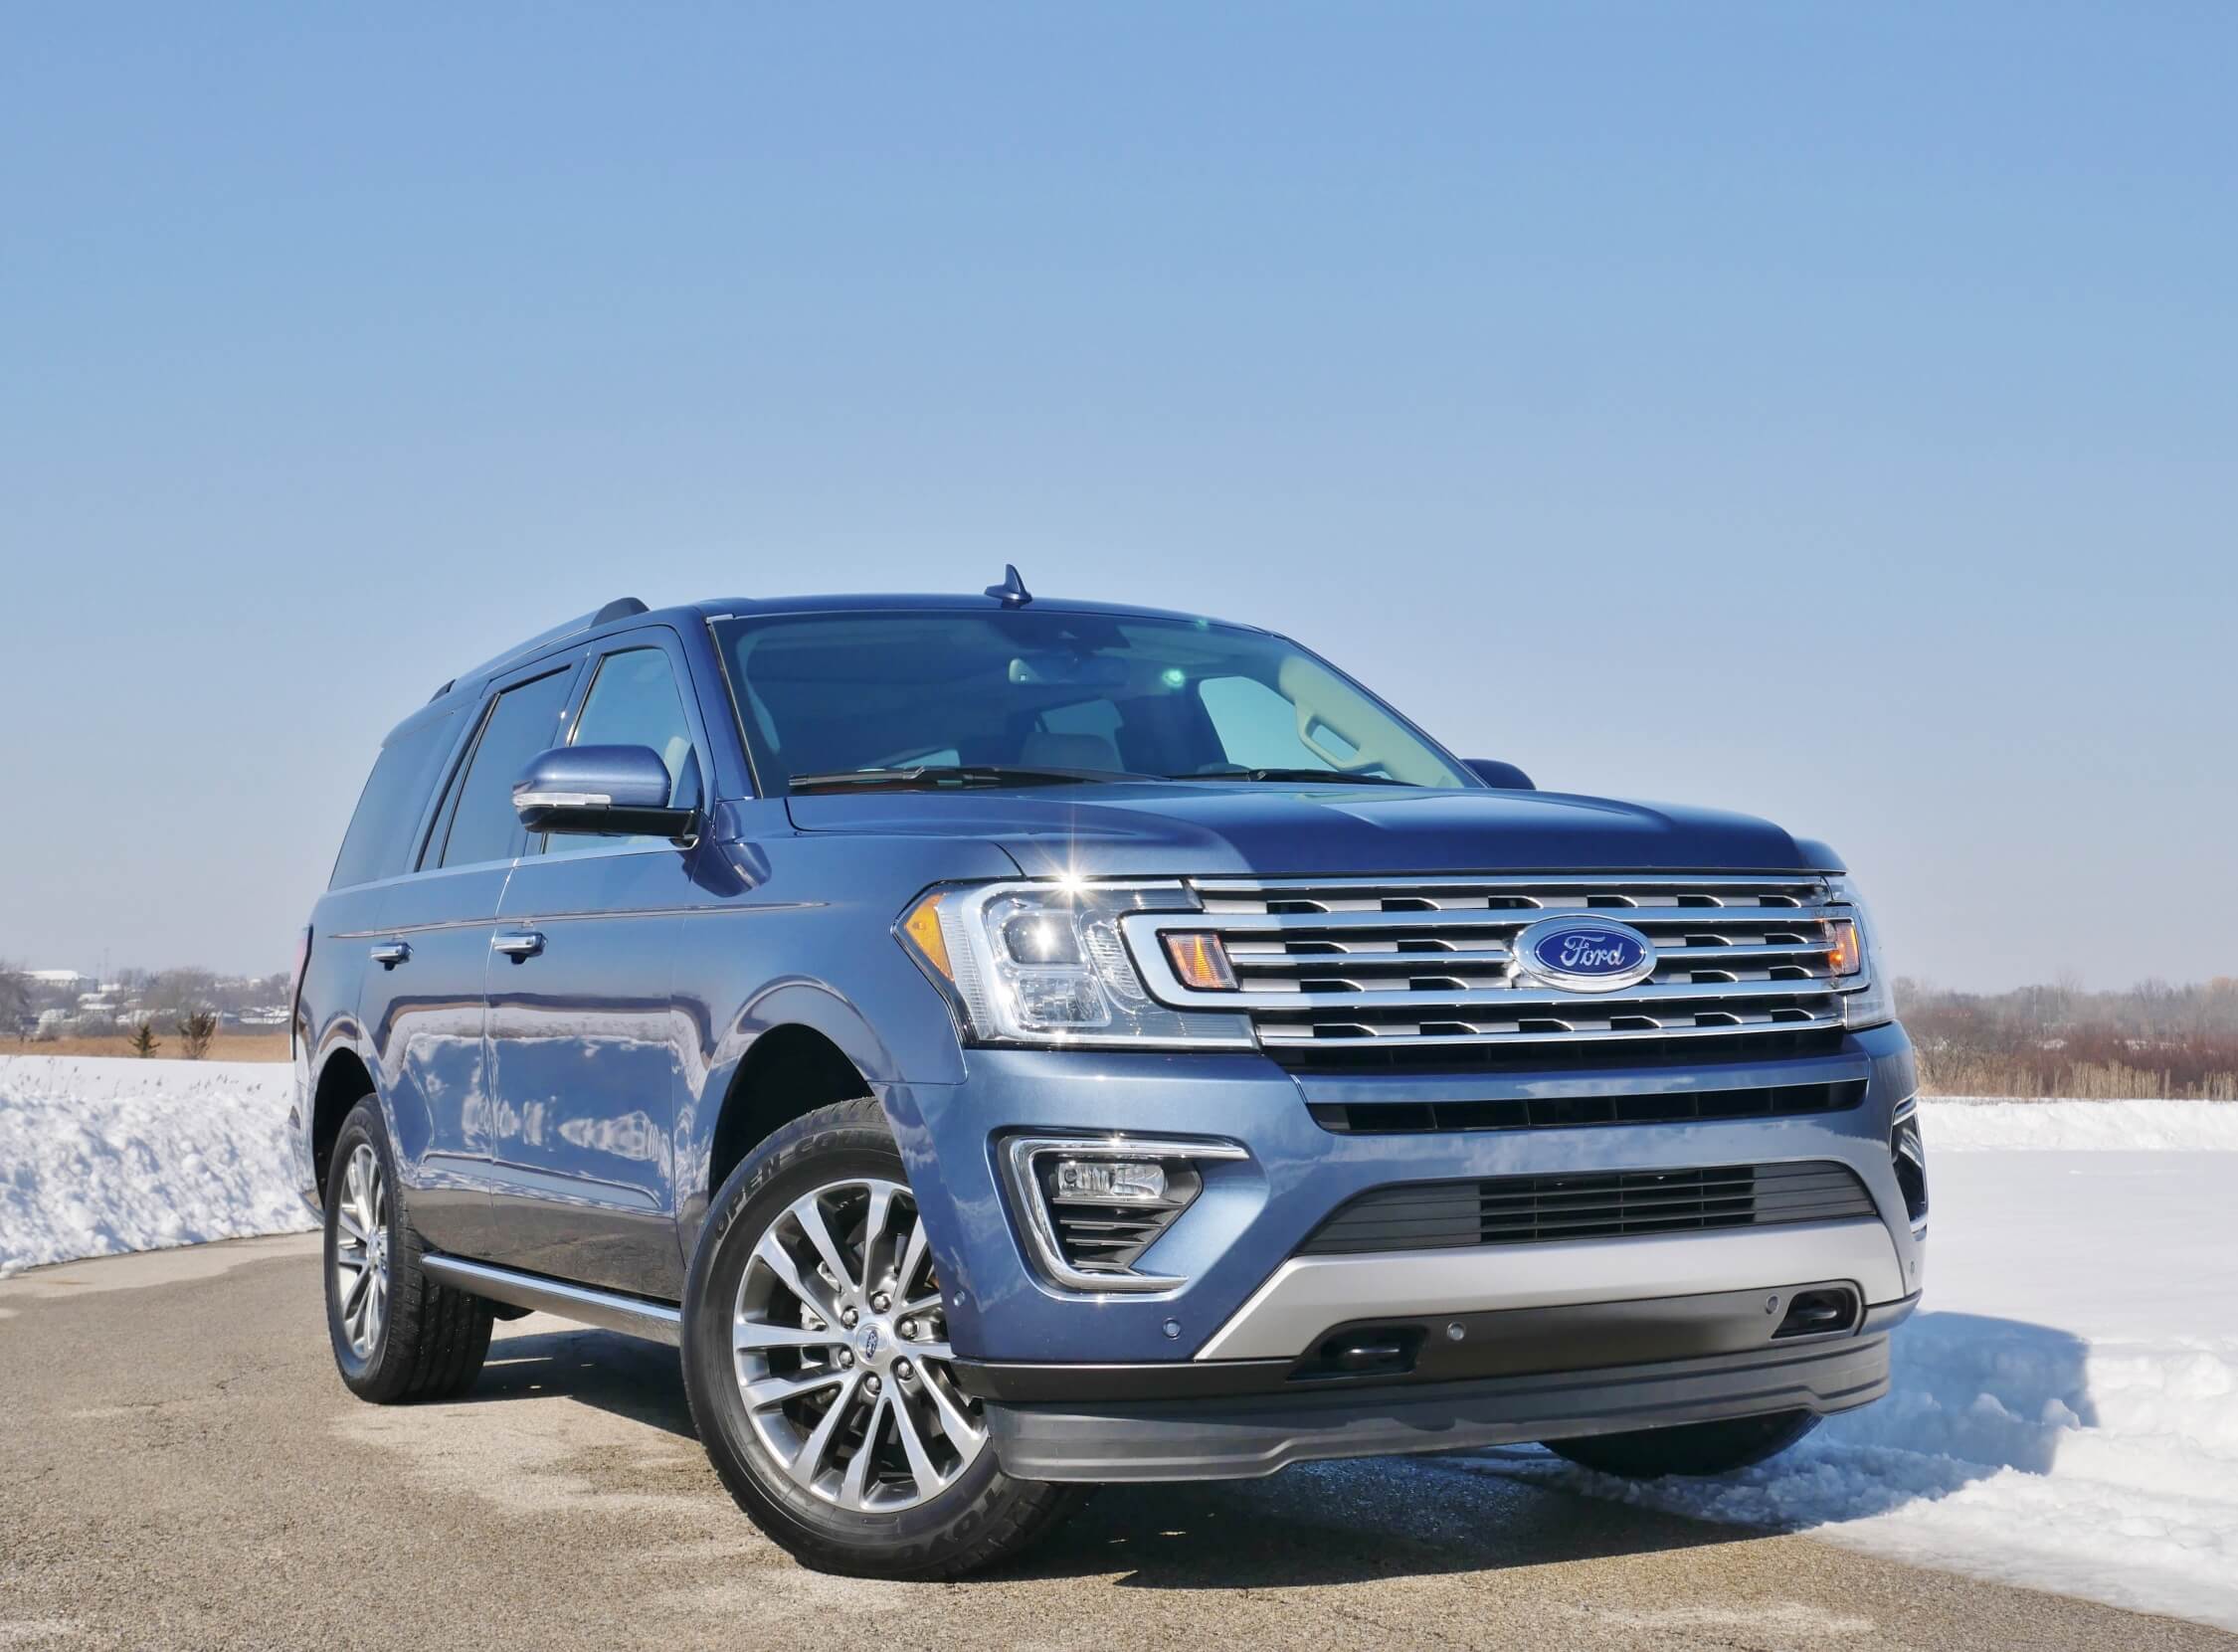 2018 Ford Expedition Limited 4x4: Raked back face, finer detailing = adopts crossover demeanor